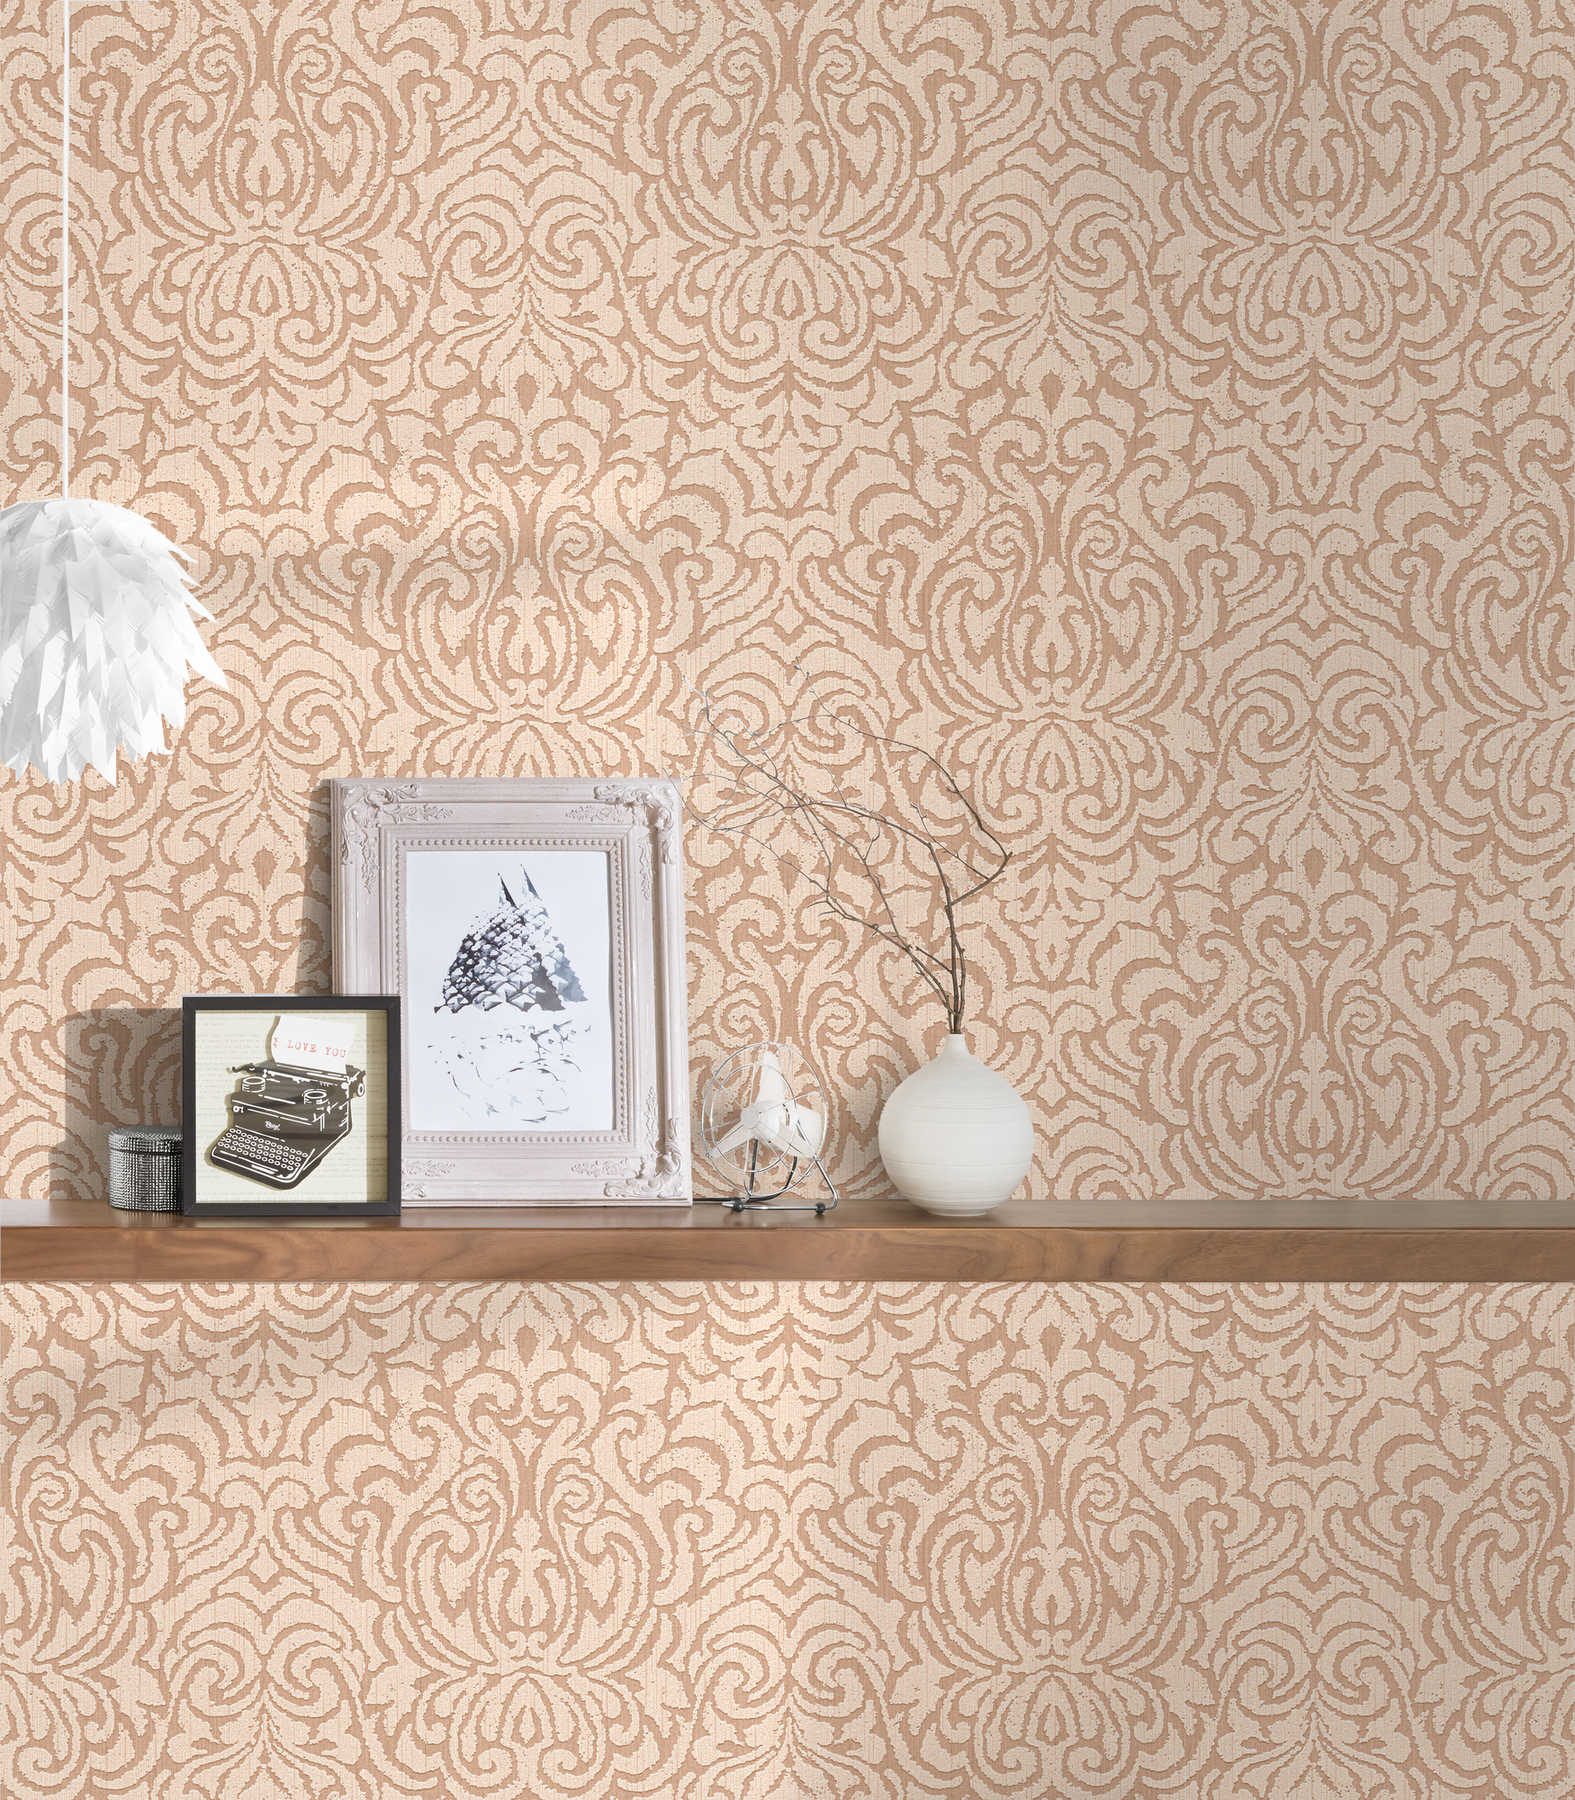             wallpaper ornaments used look with texture effect - beige
        